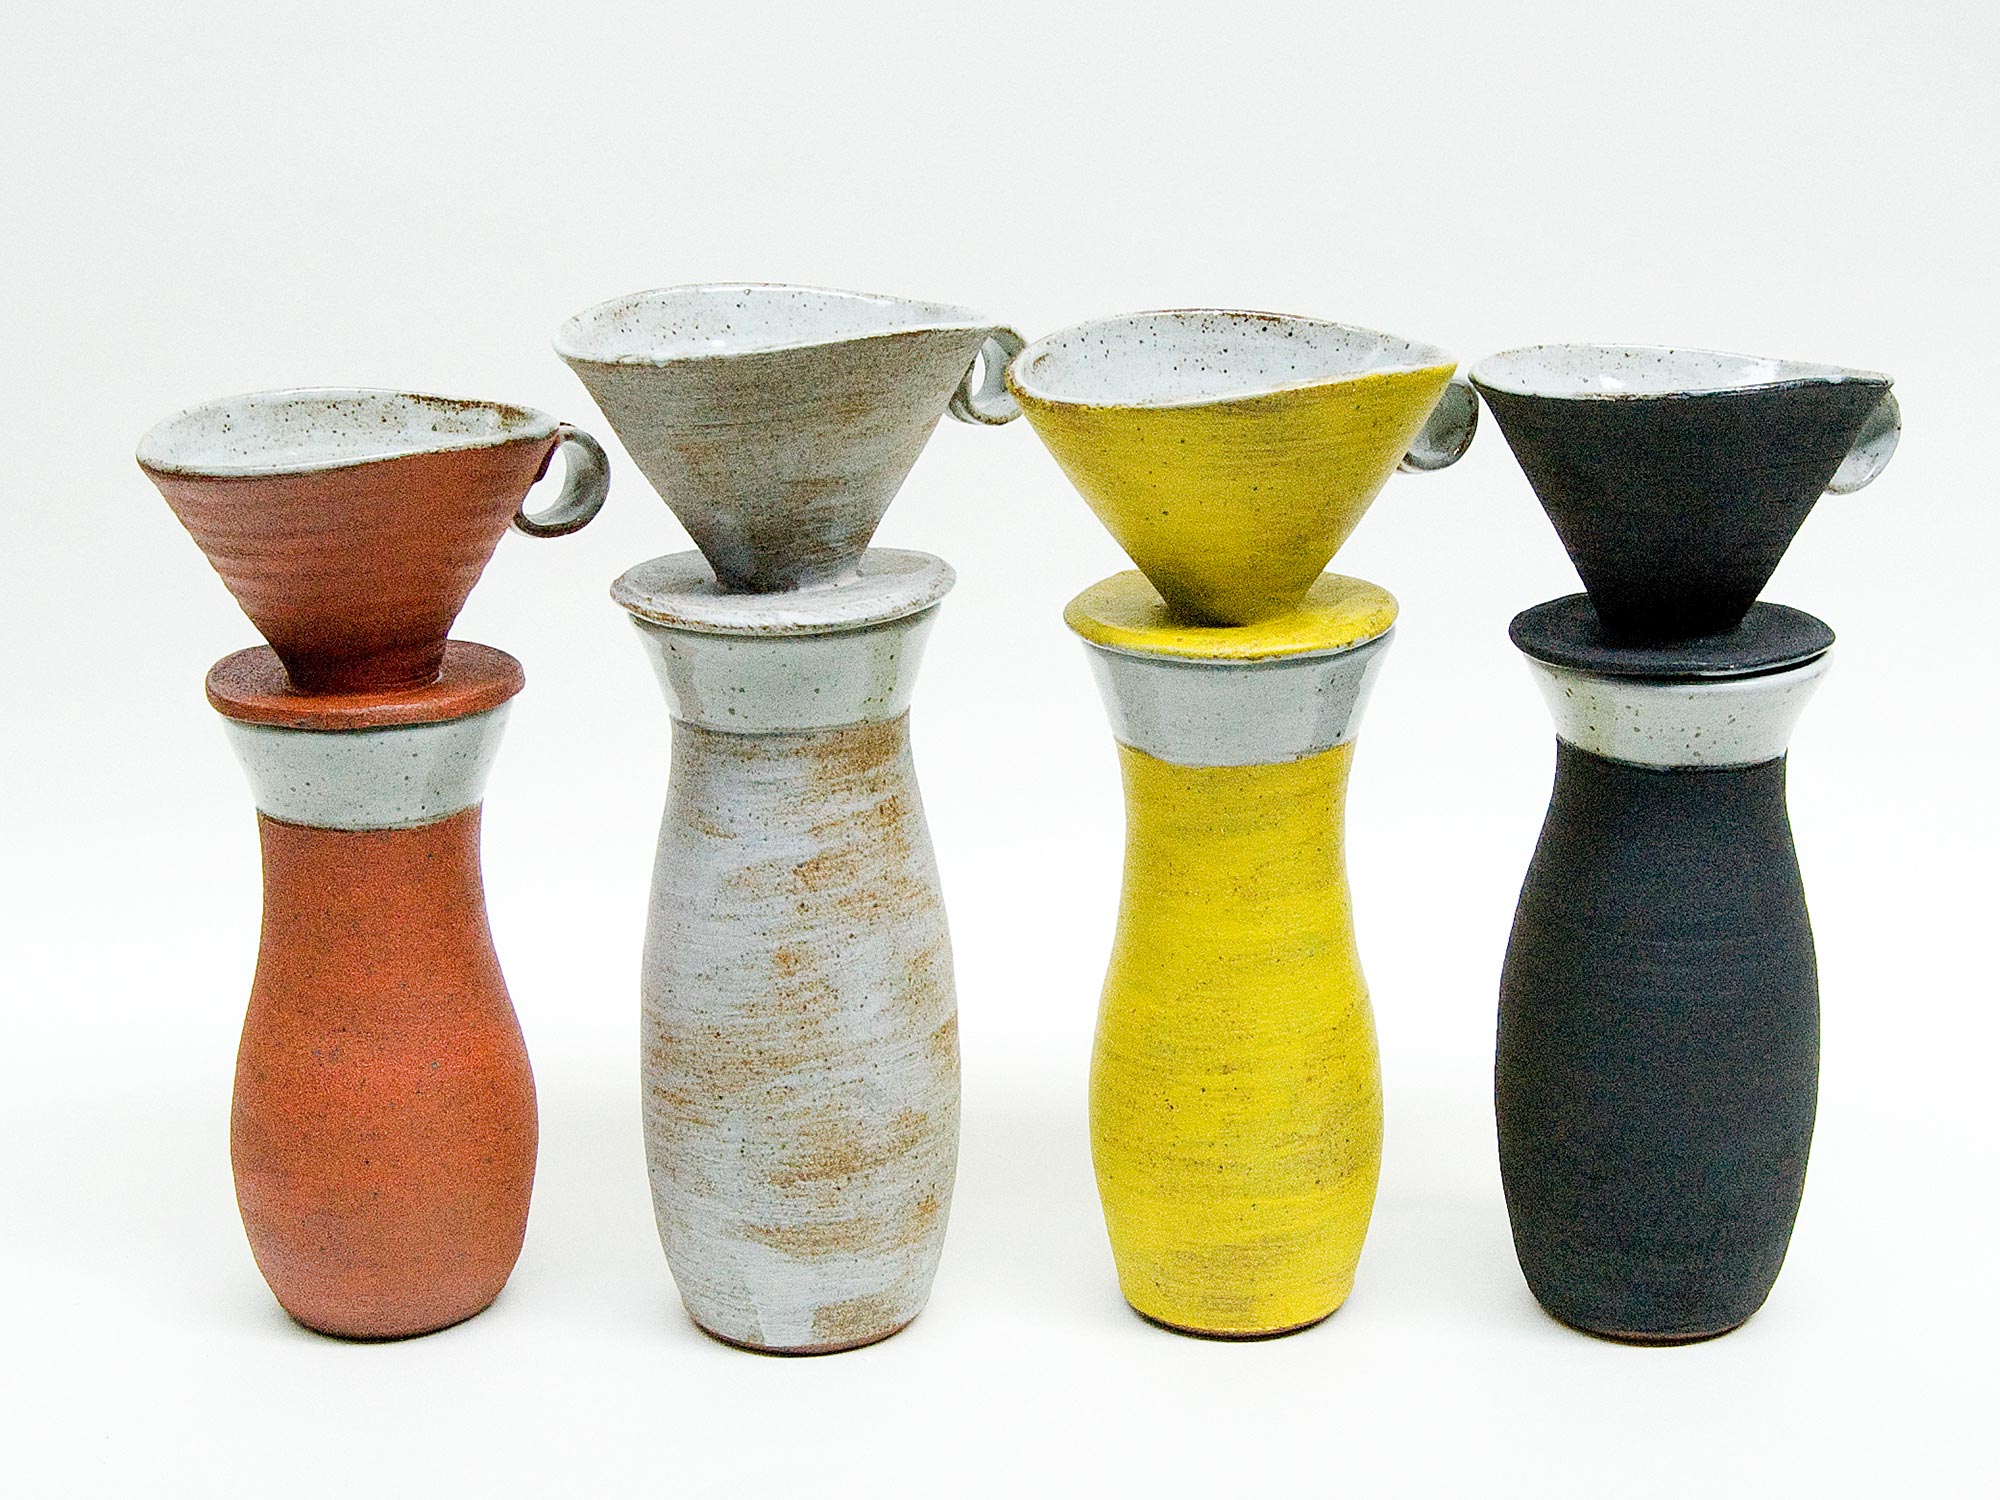  Coffee drippers and carafes, stoneware, 2014 